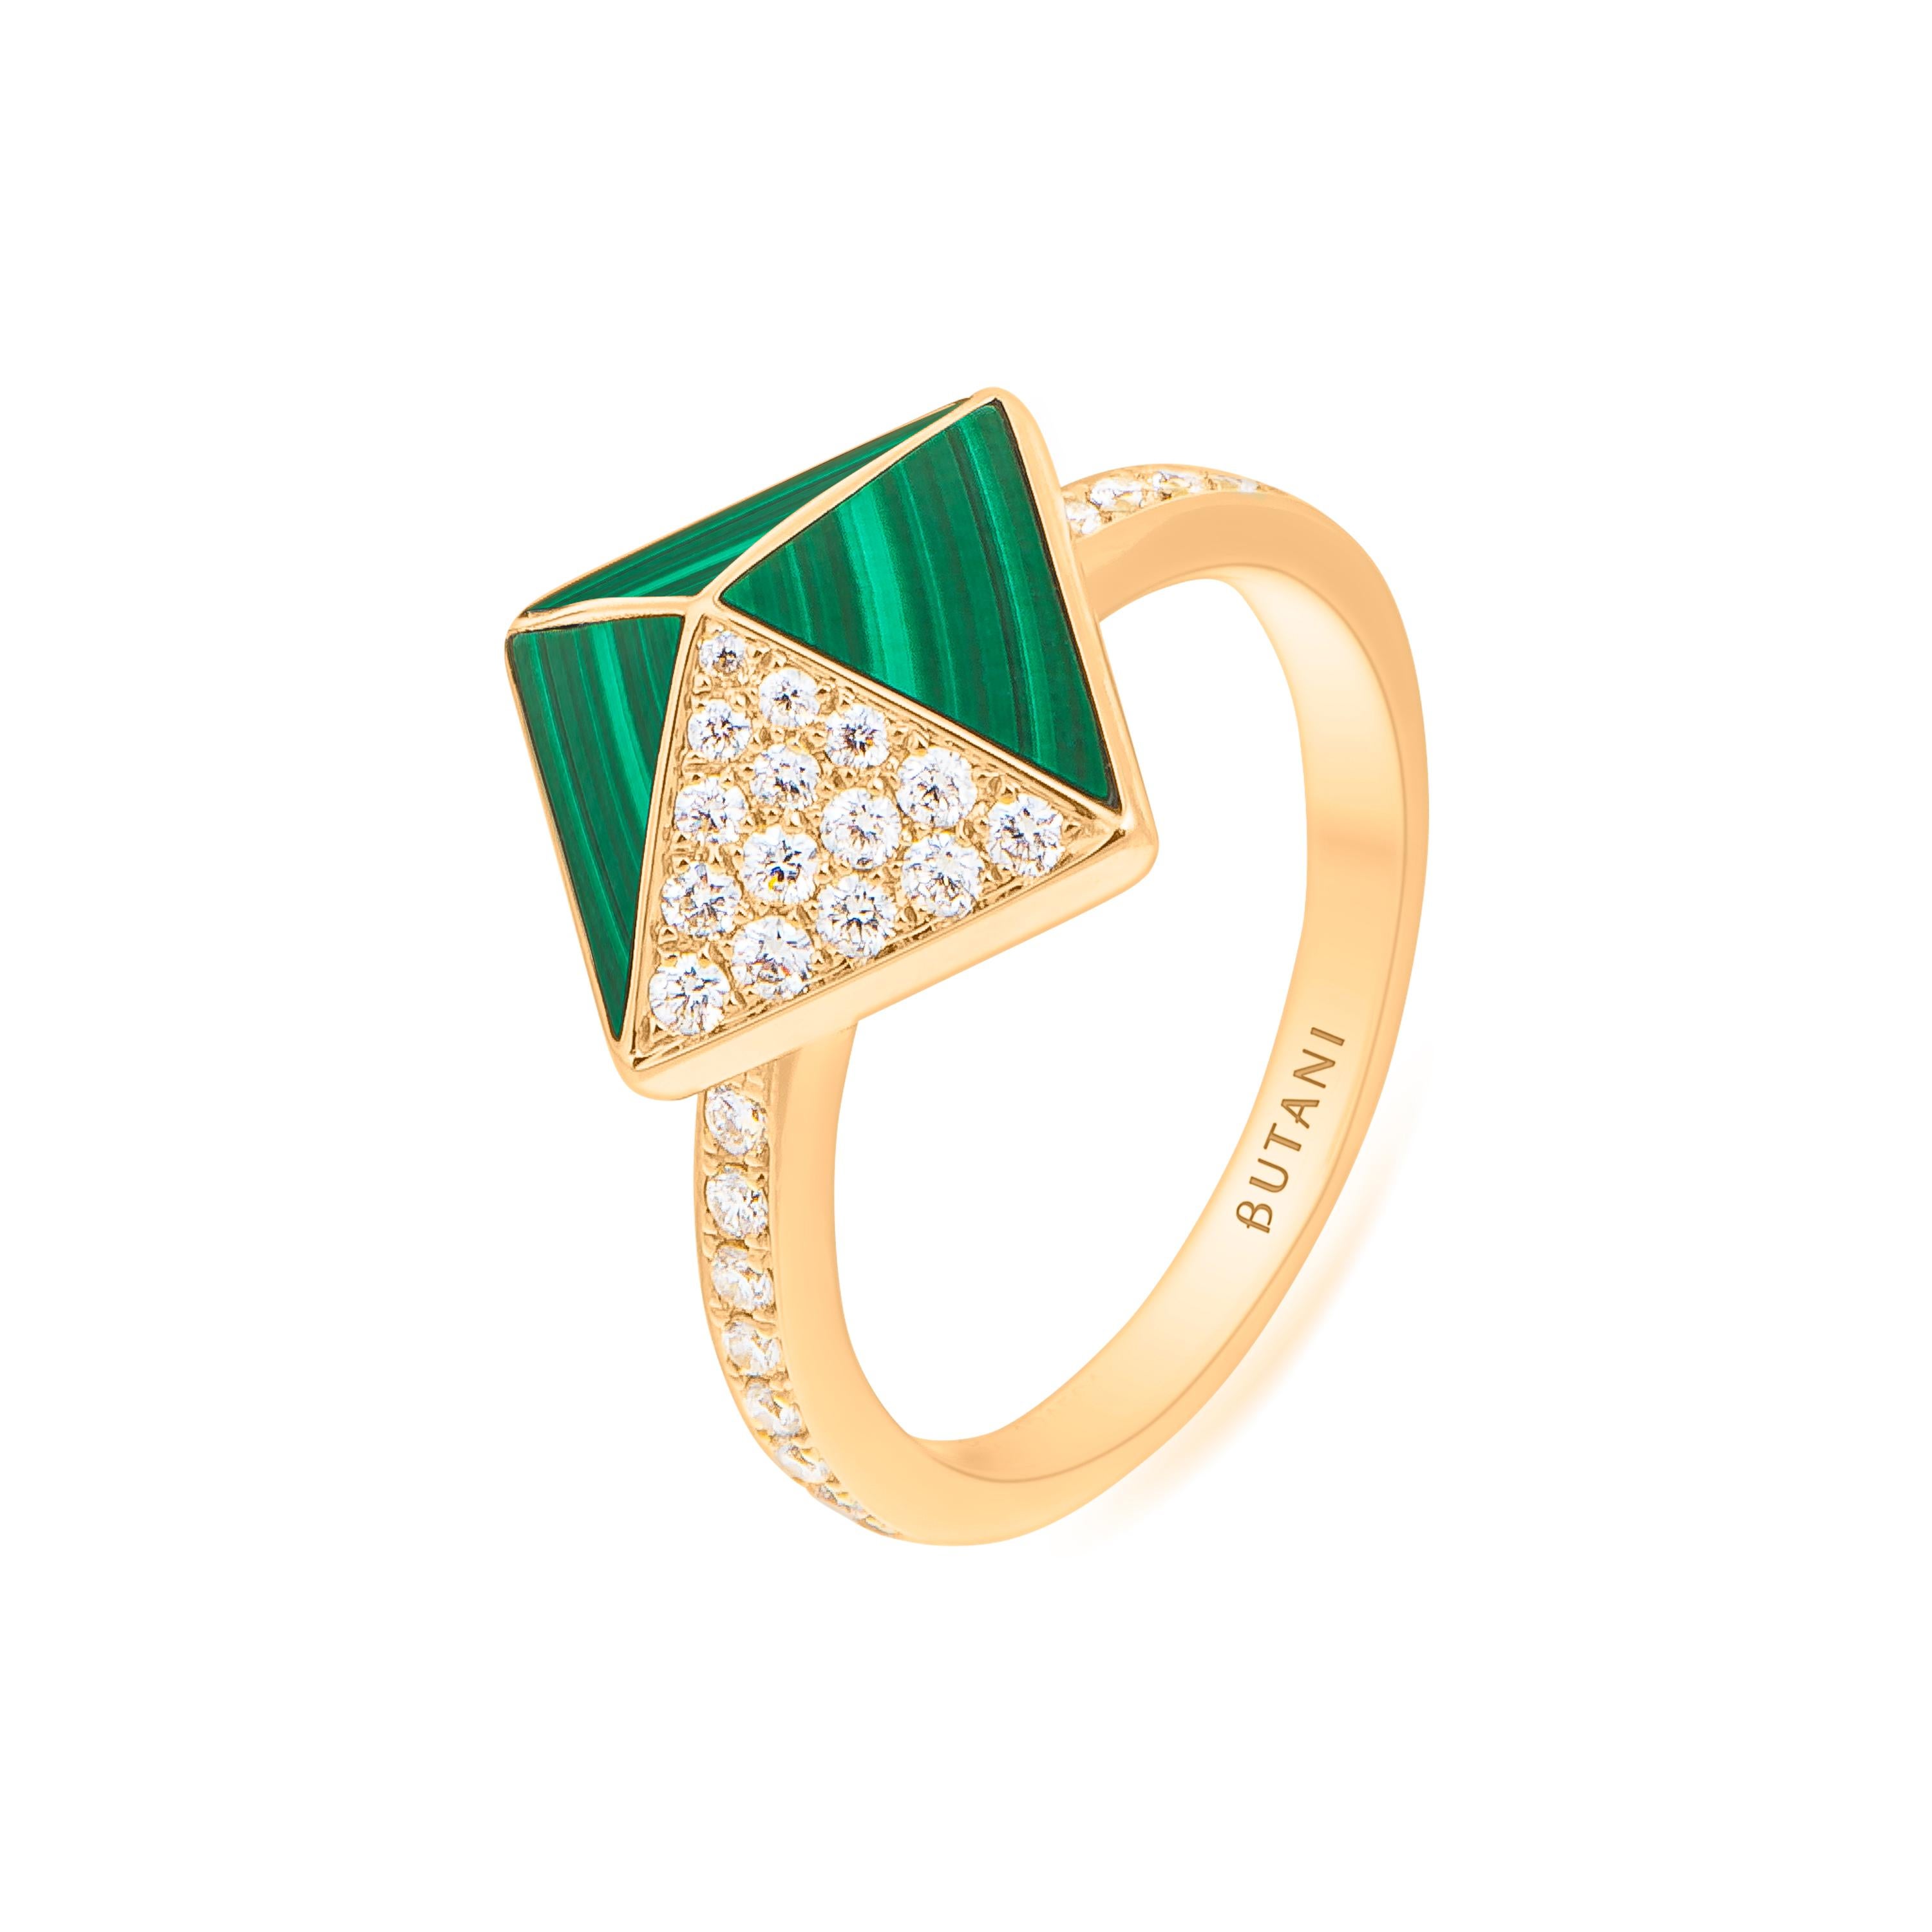 Through graphic, contemporary lines, Butani’s Tetra collection celebrates the beauty of symmetry while reimagining classic motifs of the past. 

With a powerful elegance, the Tetra Apex Ring draws eyes and forms a striking focal point on the finger.